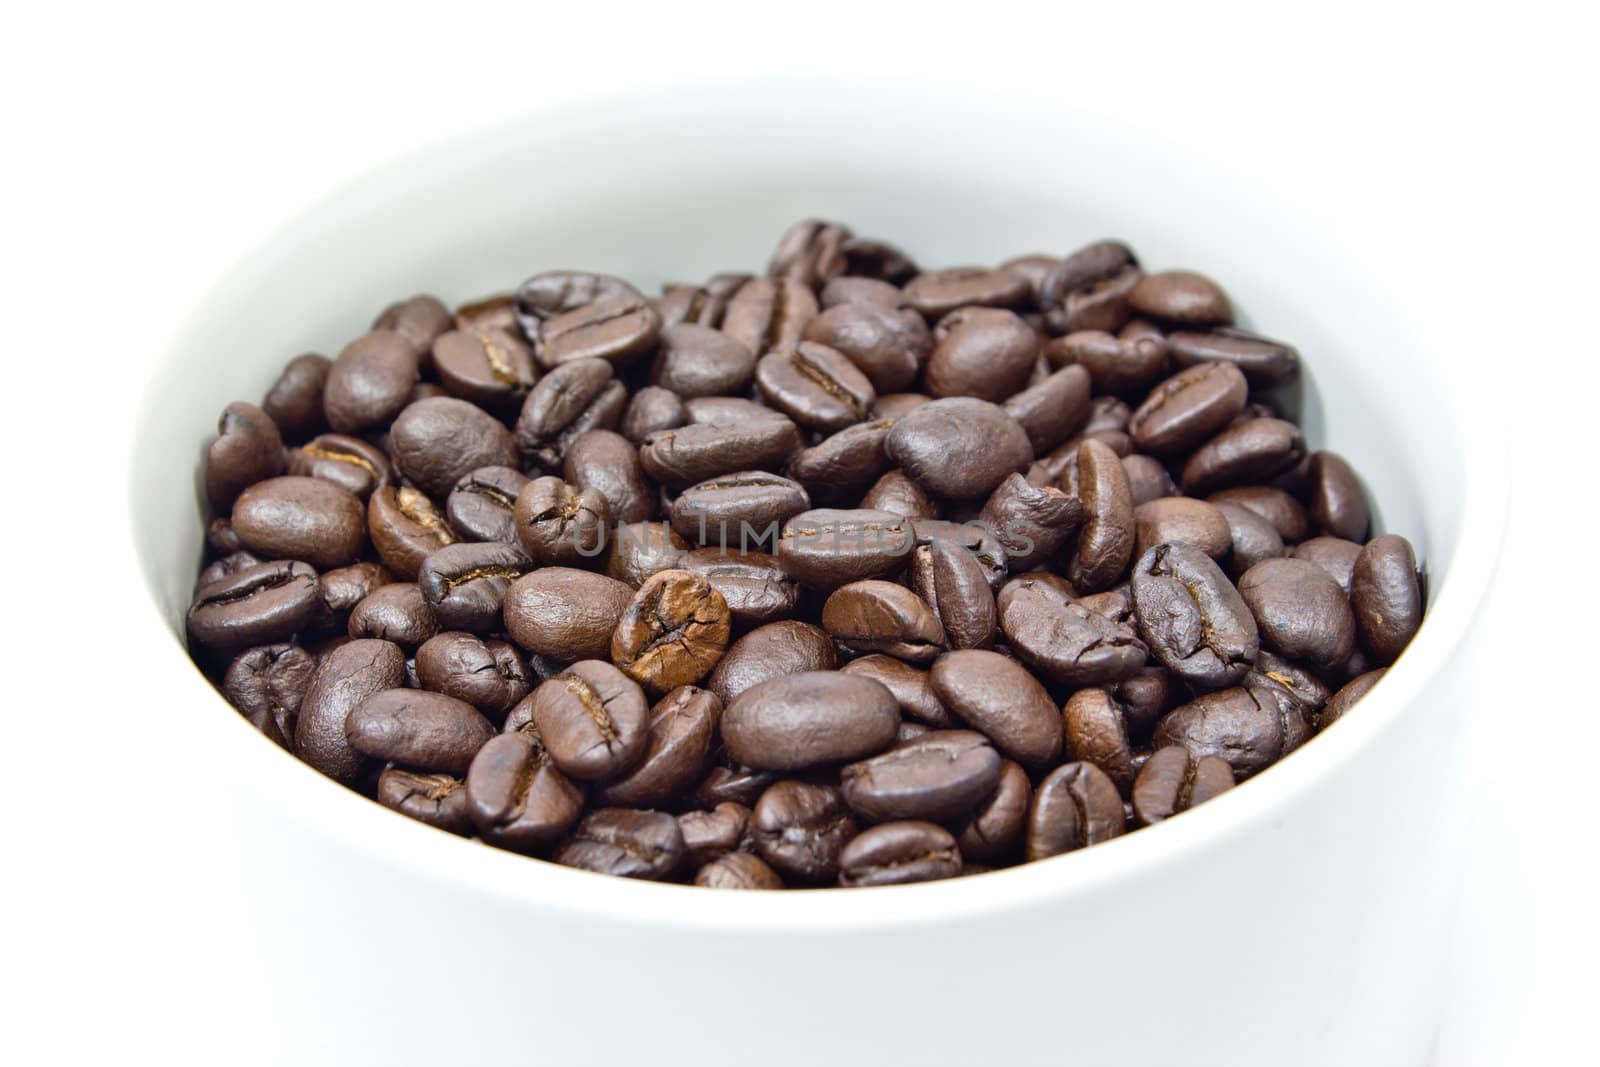 A cup and coffee beans on white background